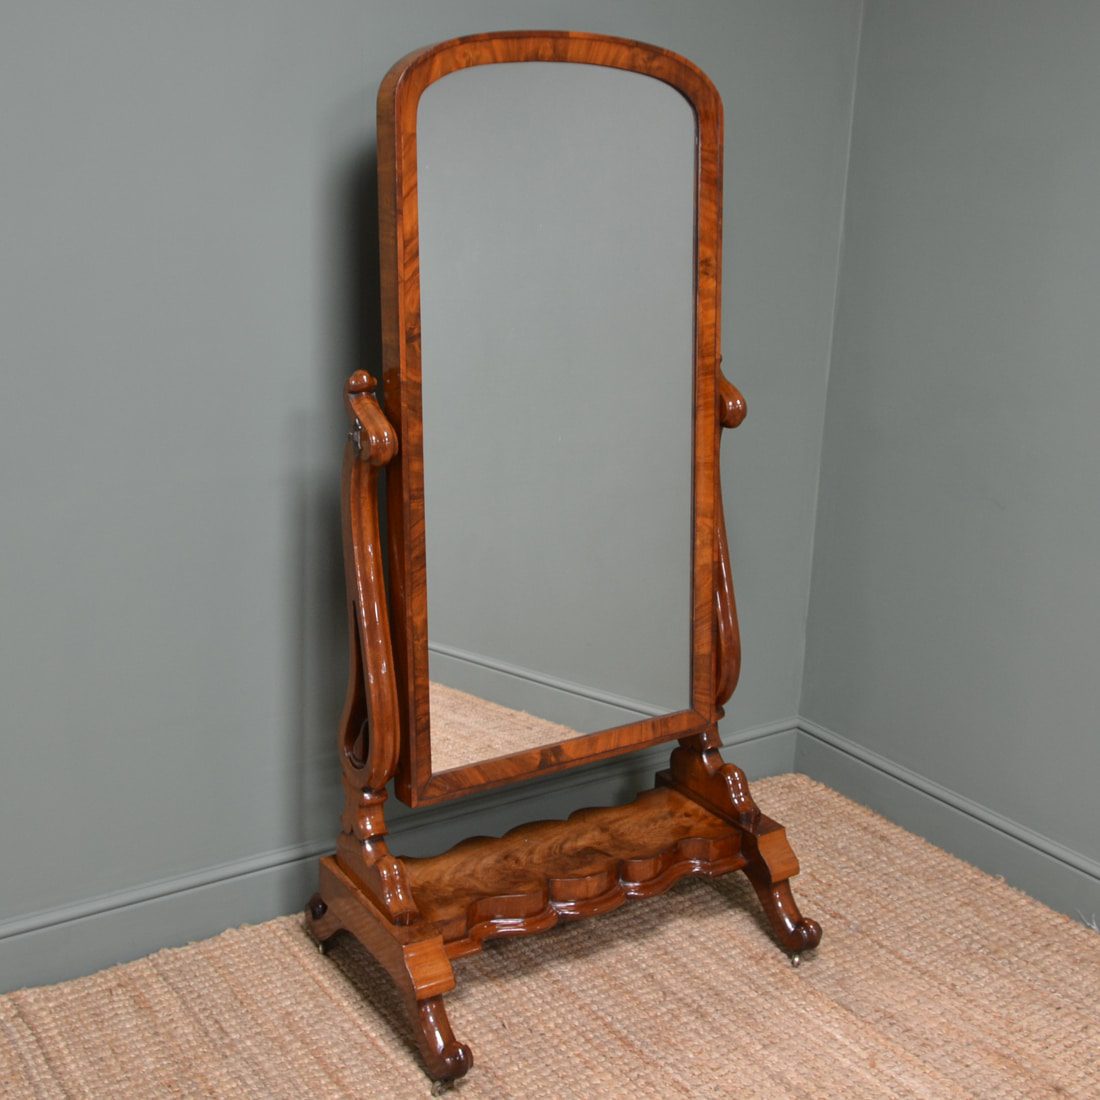 Antique Cheval Mirrors Antiques World, Small Standing Antique Mirror